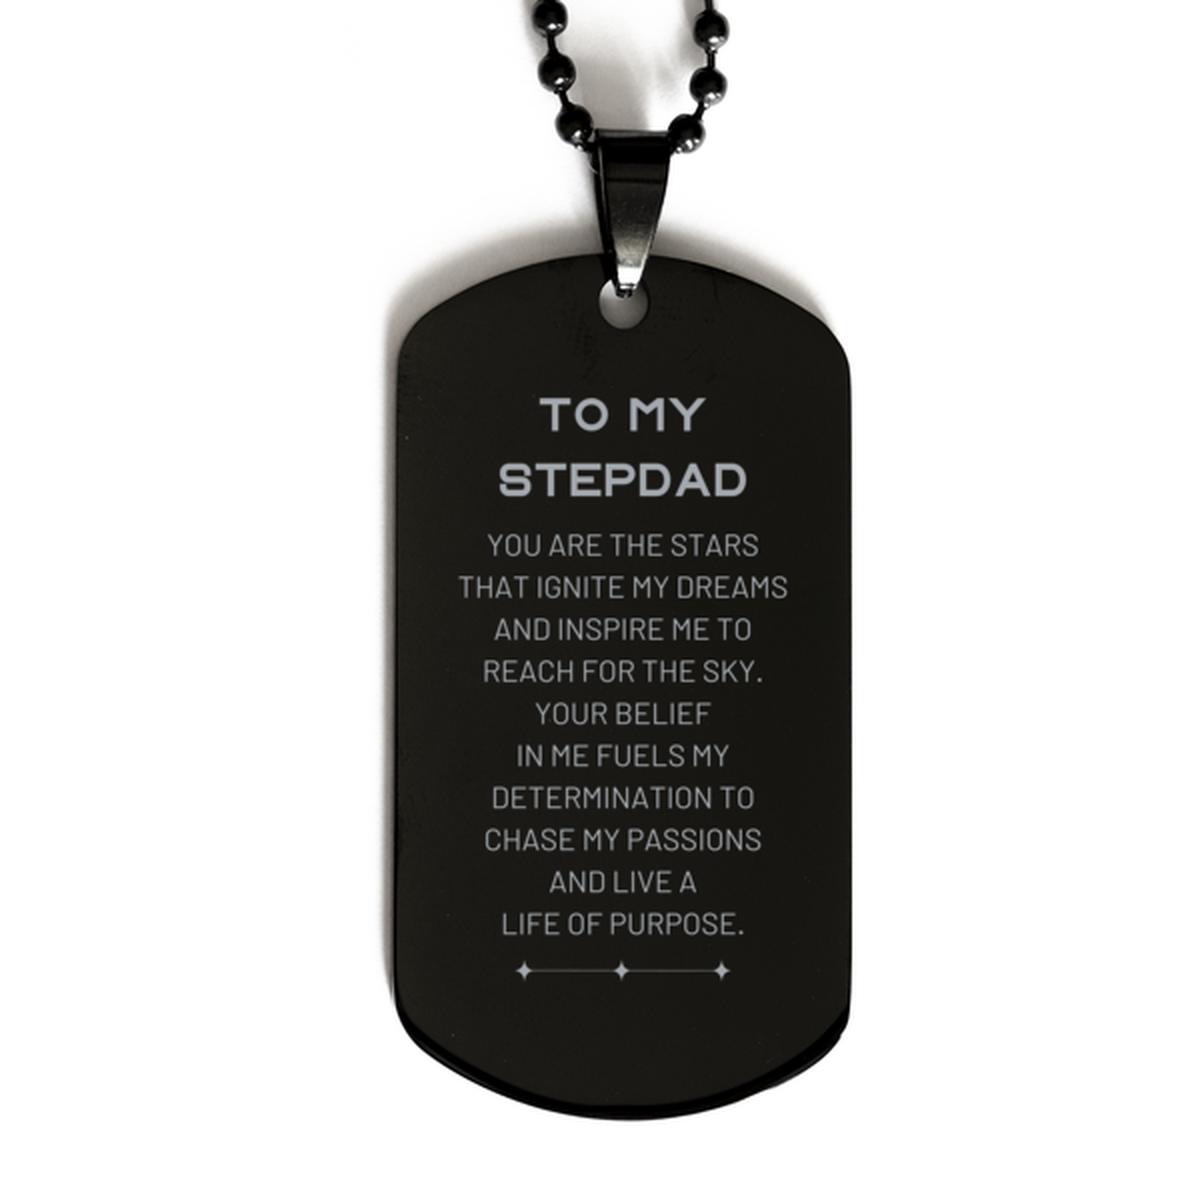 To My Stepdad Black Dog Tag, You are the stars that ignite my dreams and inspire me to reach for the sky, Birthday Unique Gifts For Stepdad, Thank You Gifts For Stepdad